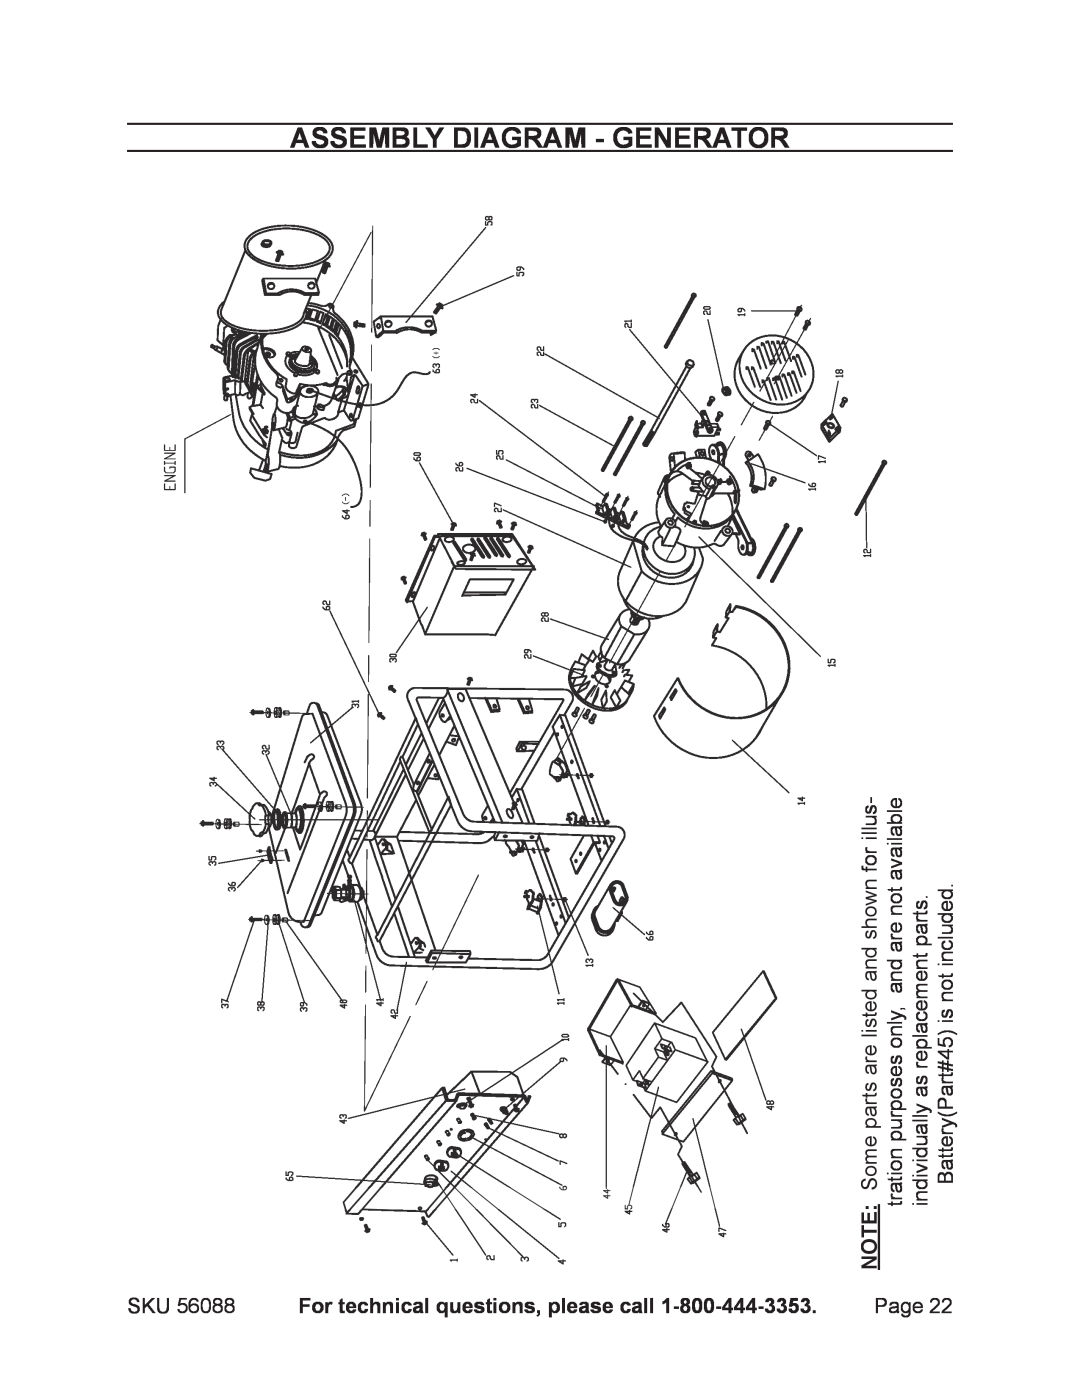 Harbor Freight Tools 56088 warranty Assembly Diagram - Generator, For technical questions, please call 